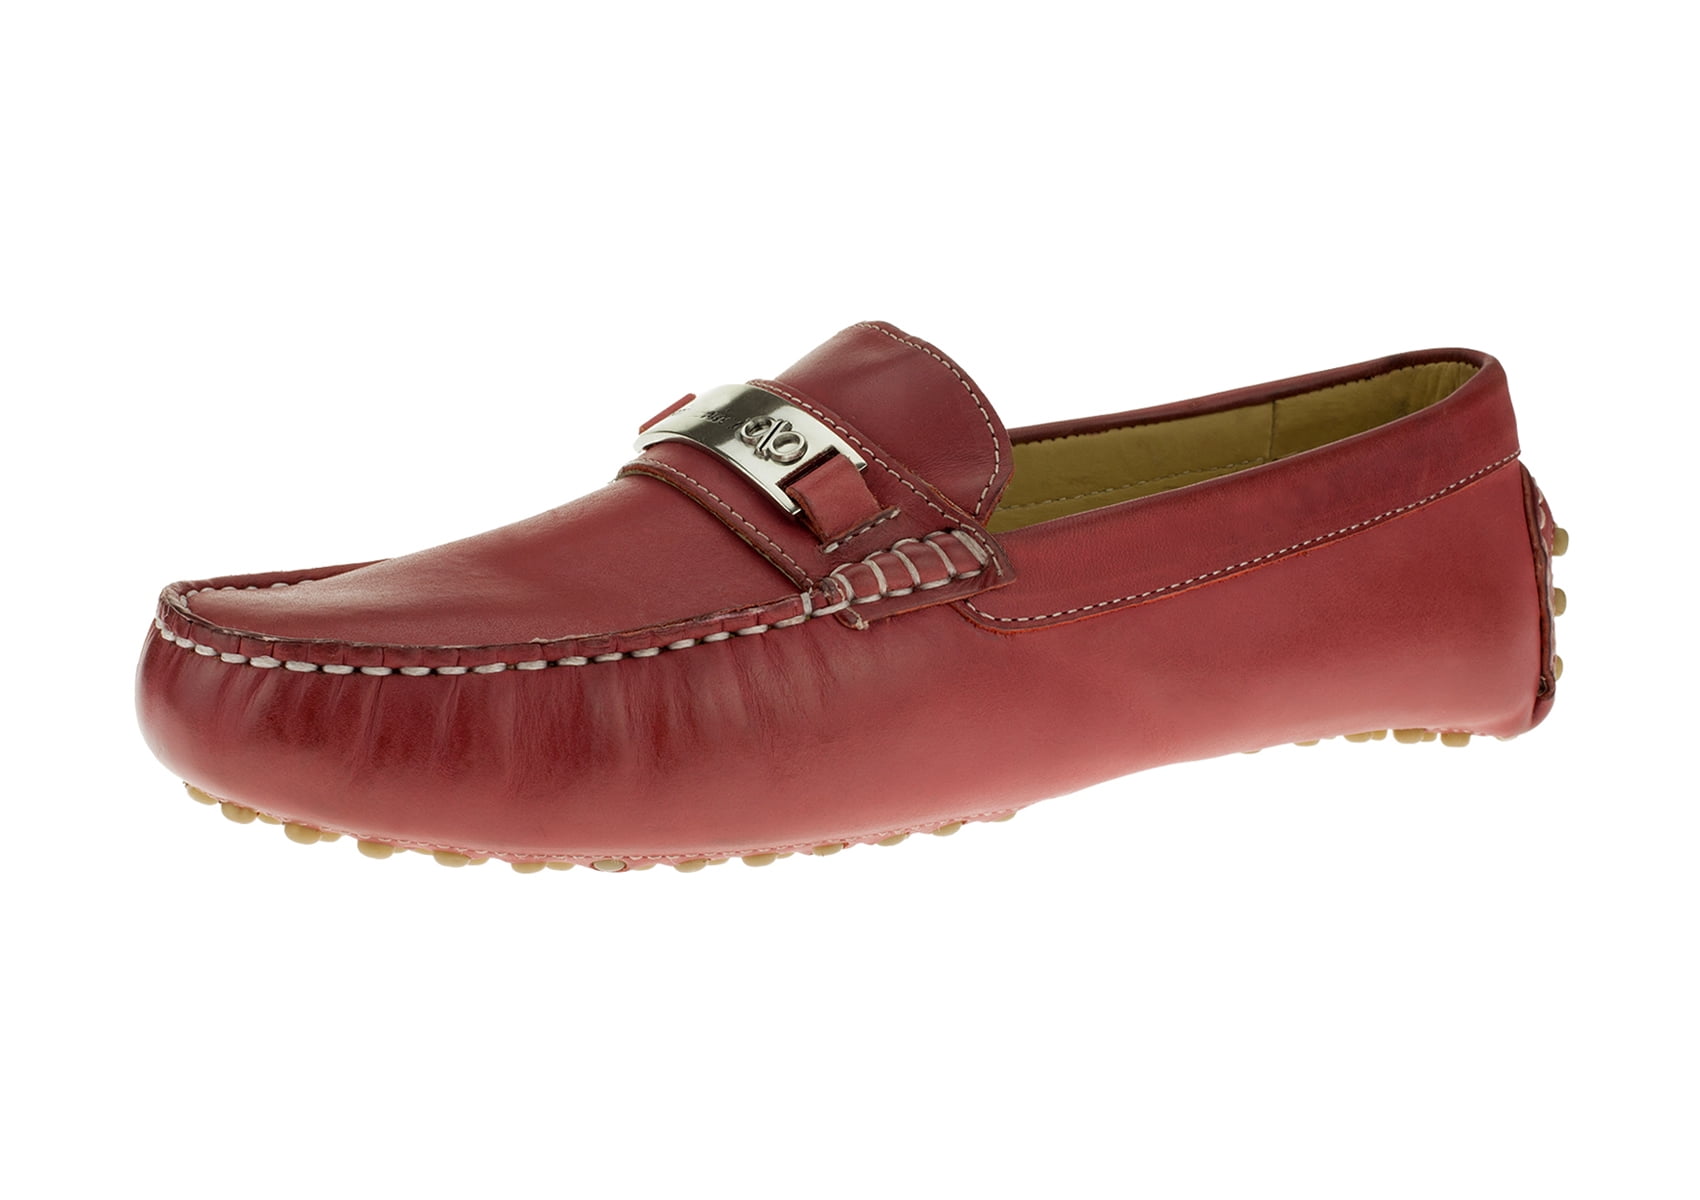 Designer Driving Loafers, Red Moccasin Shoes, Leather Moccasin